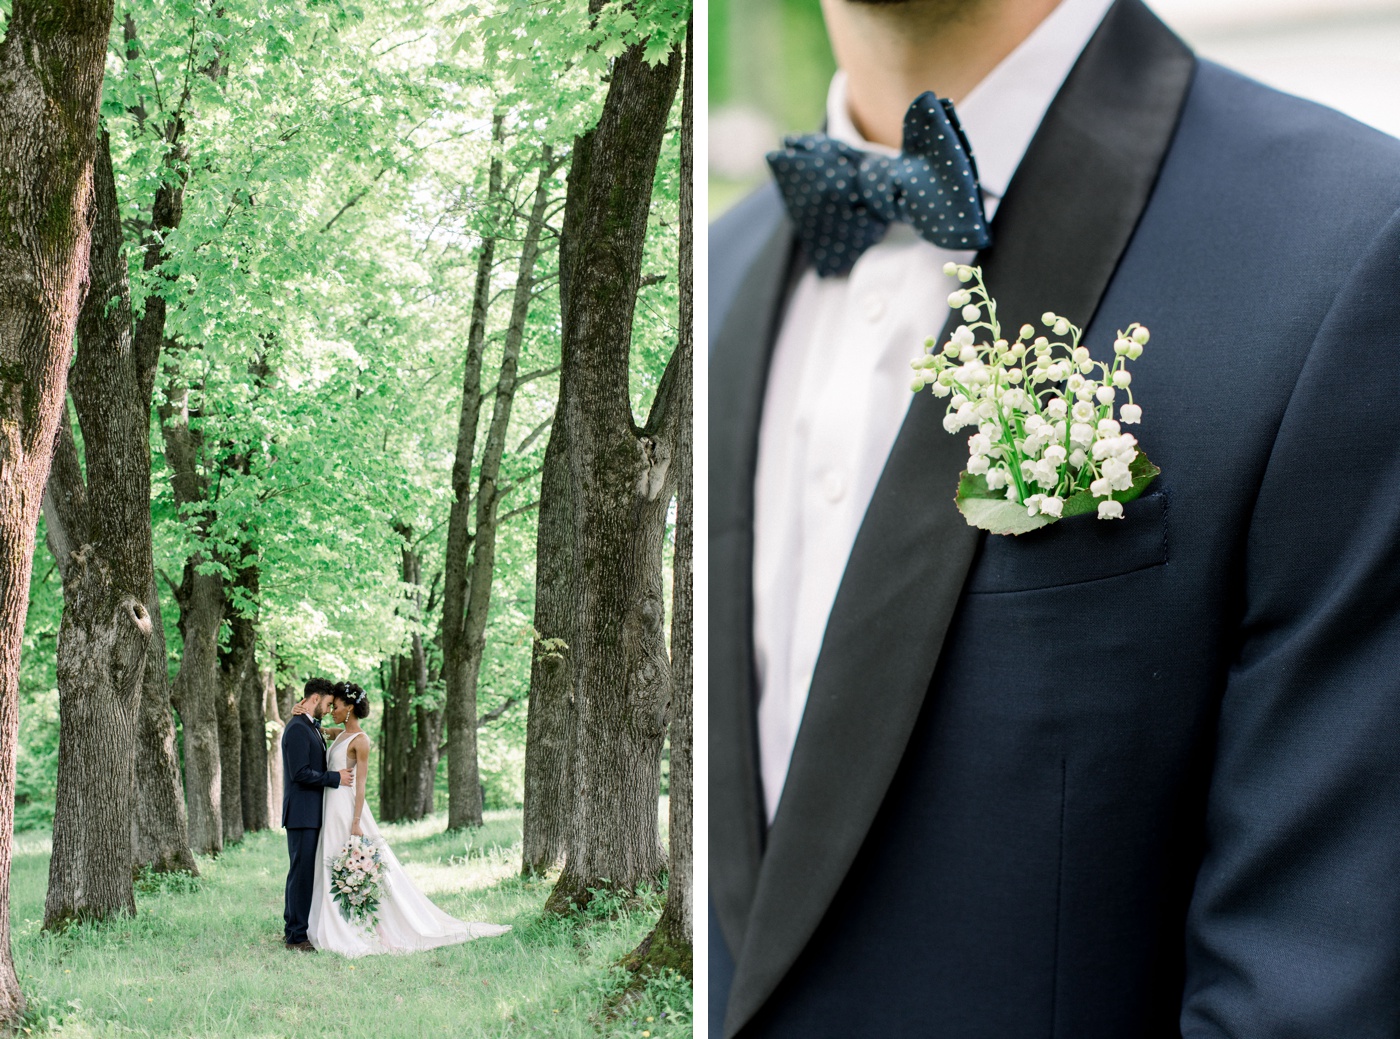 Wedding boutonniere with lily of the valley by Emily Herzig